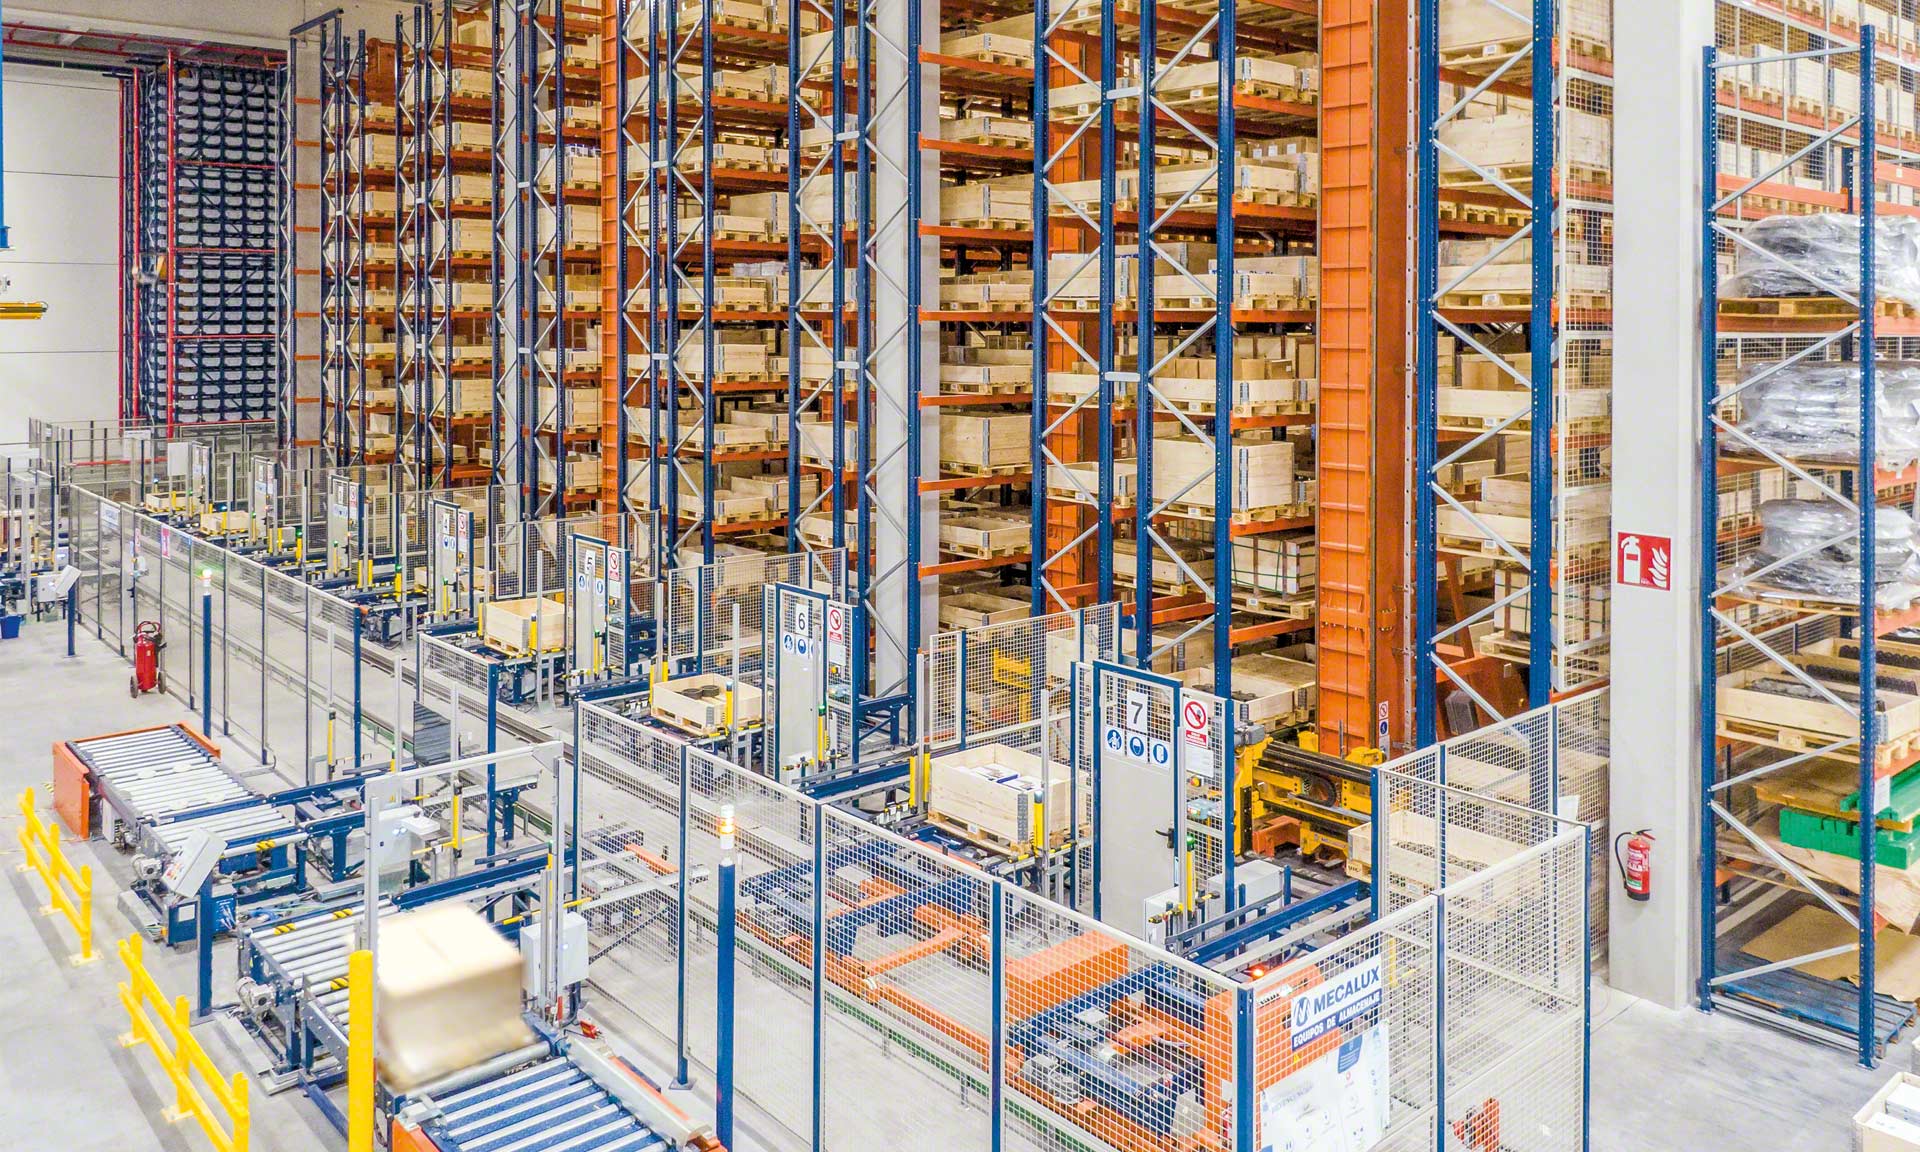 Industrias Yuk: centralised logistics, five installations in one with thousands of SKUs